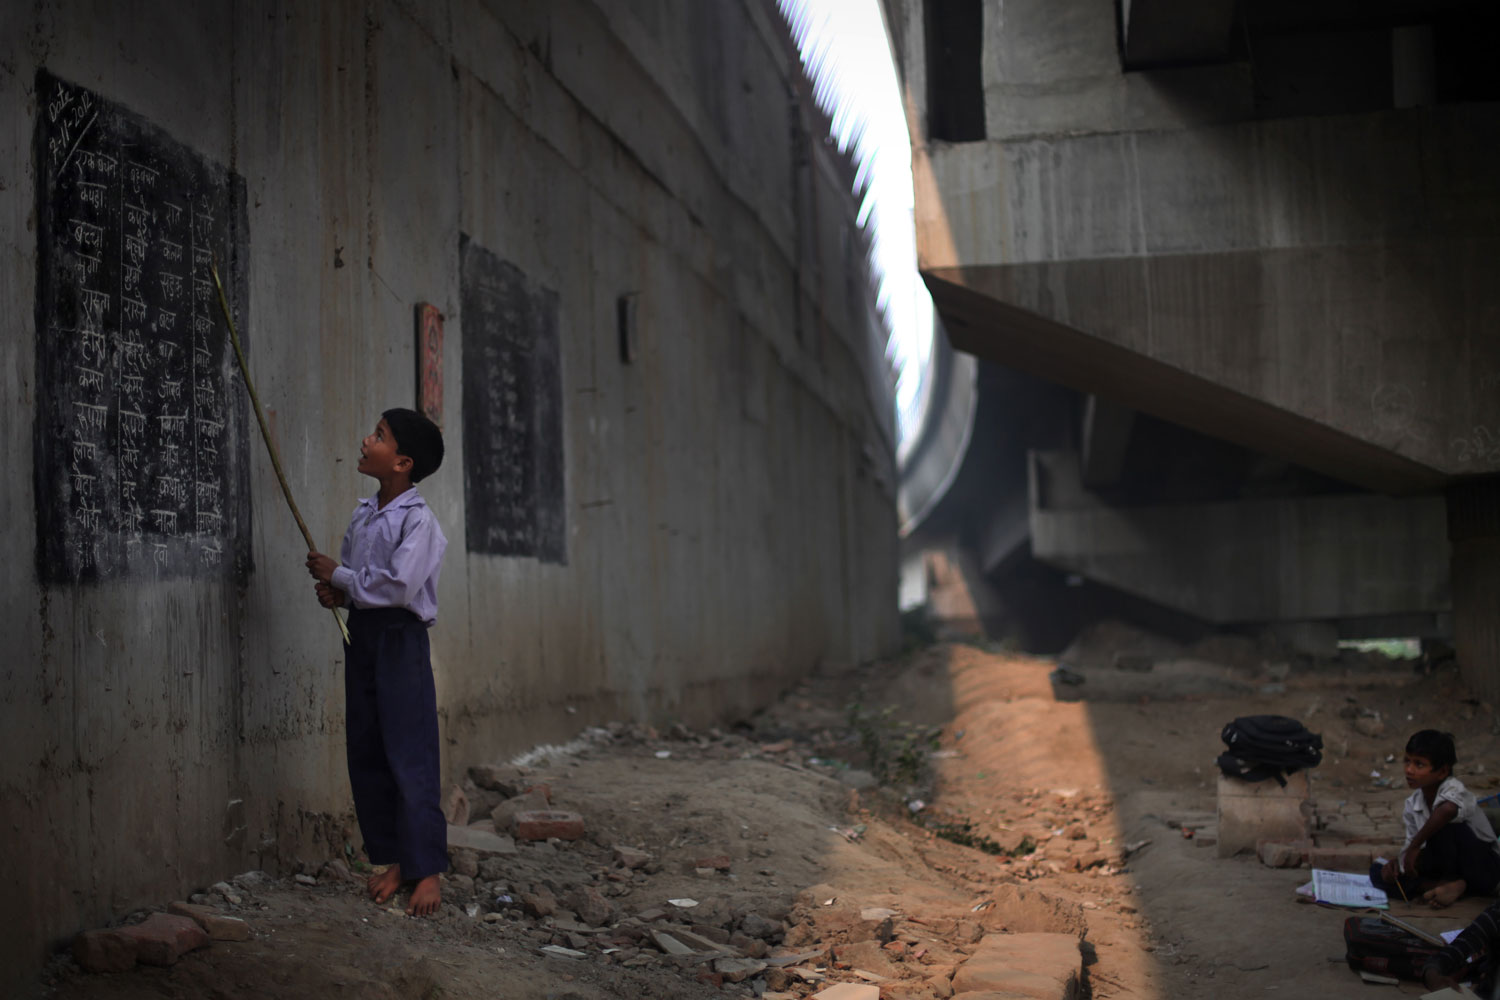 Image: Nov. 7, 2012. Indian child Rajesh, 8, reads from a black board painted on a building wall at a free school run under a metro bridge in New Delhi.